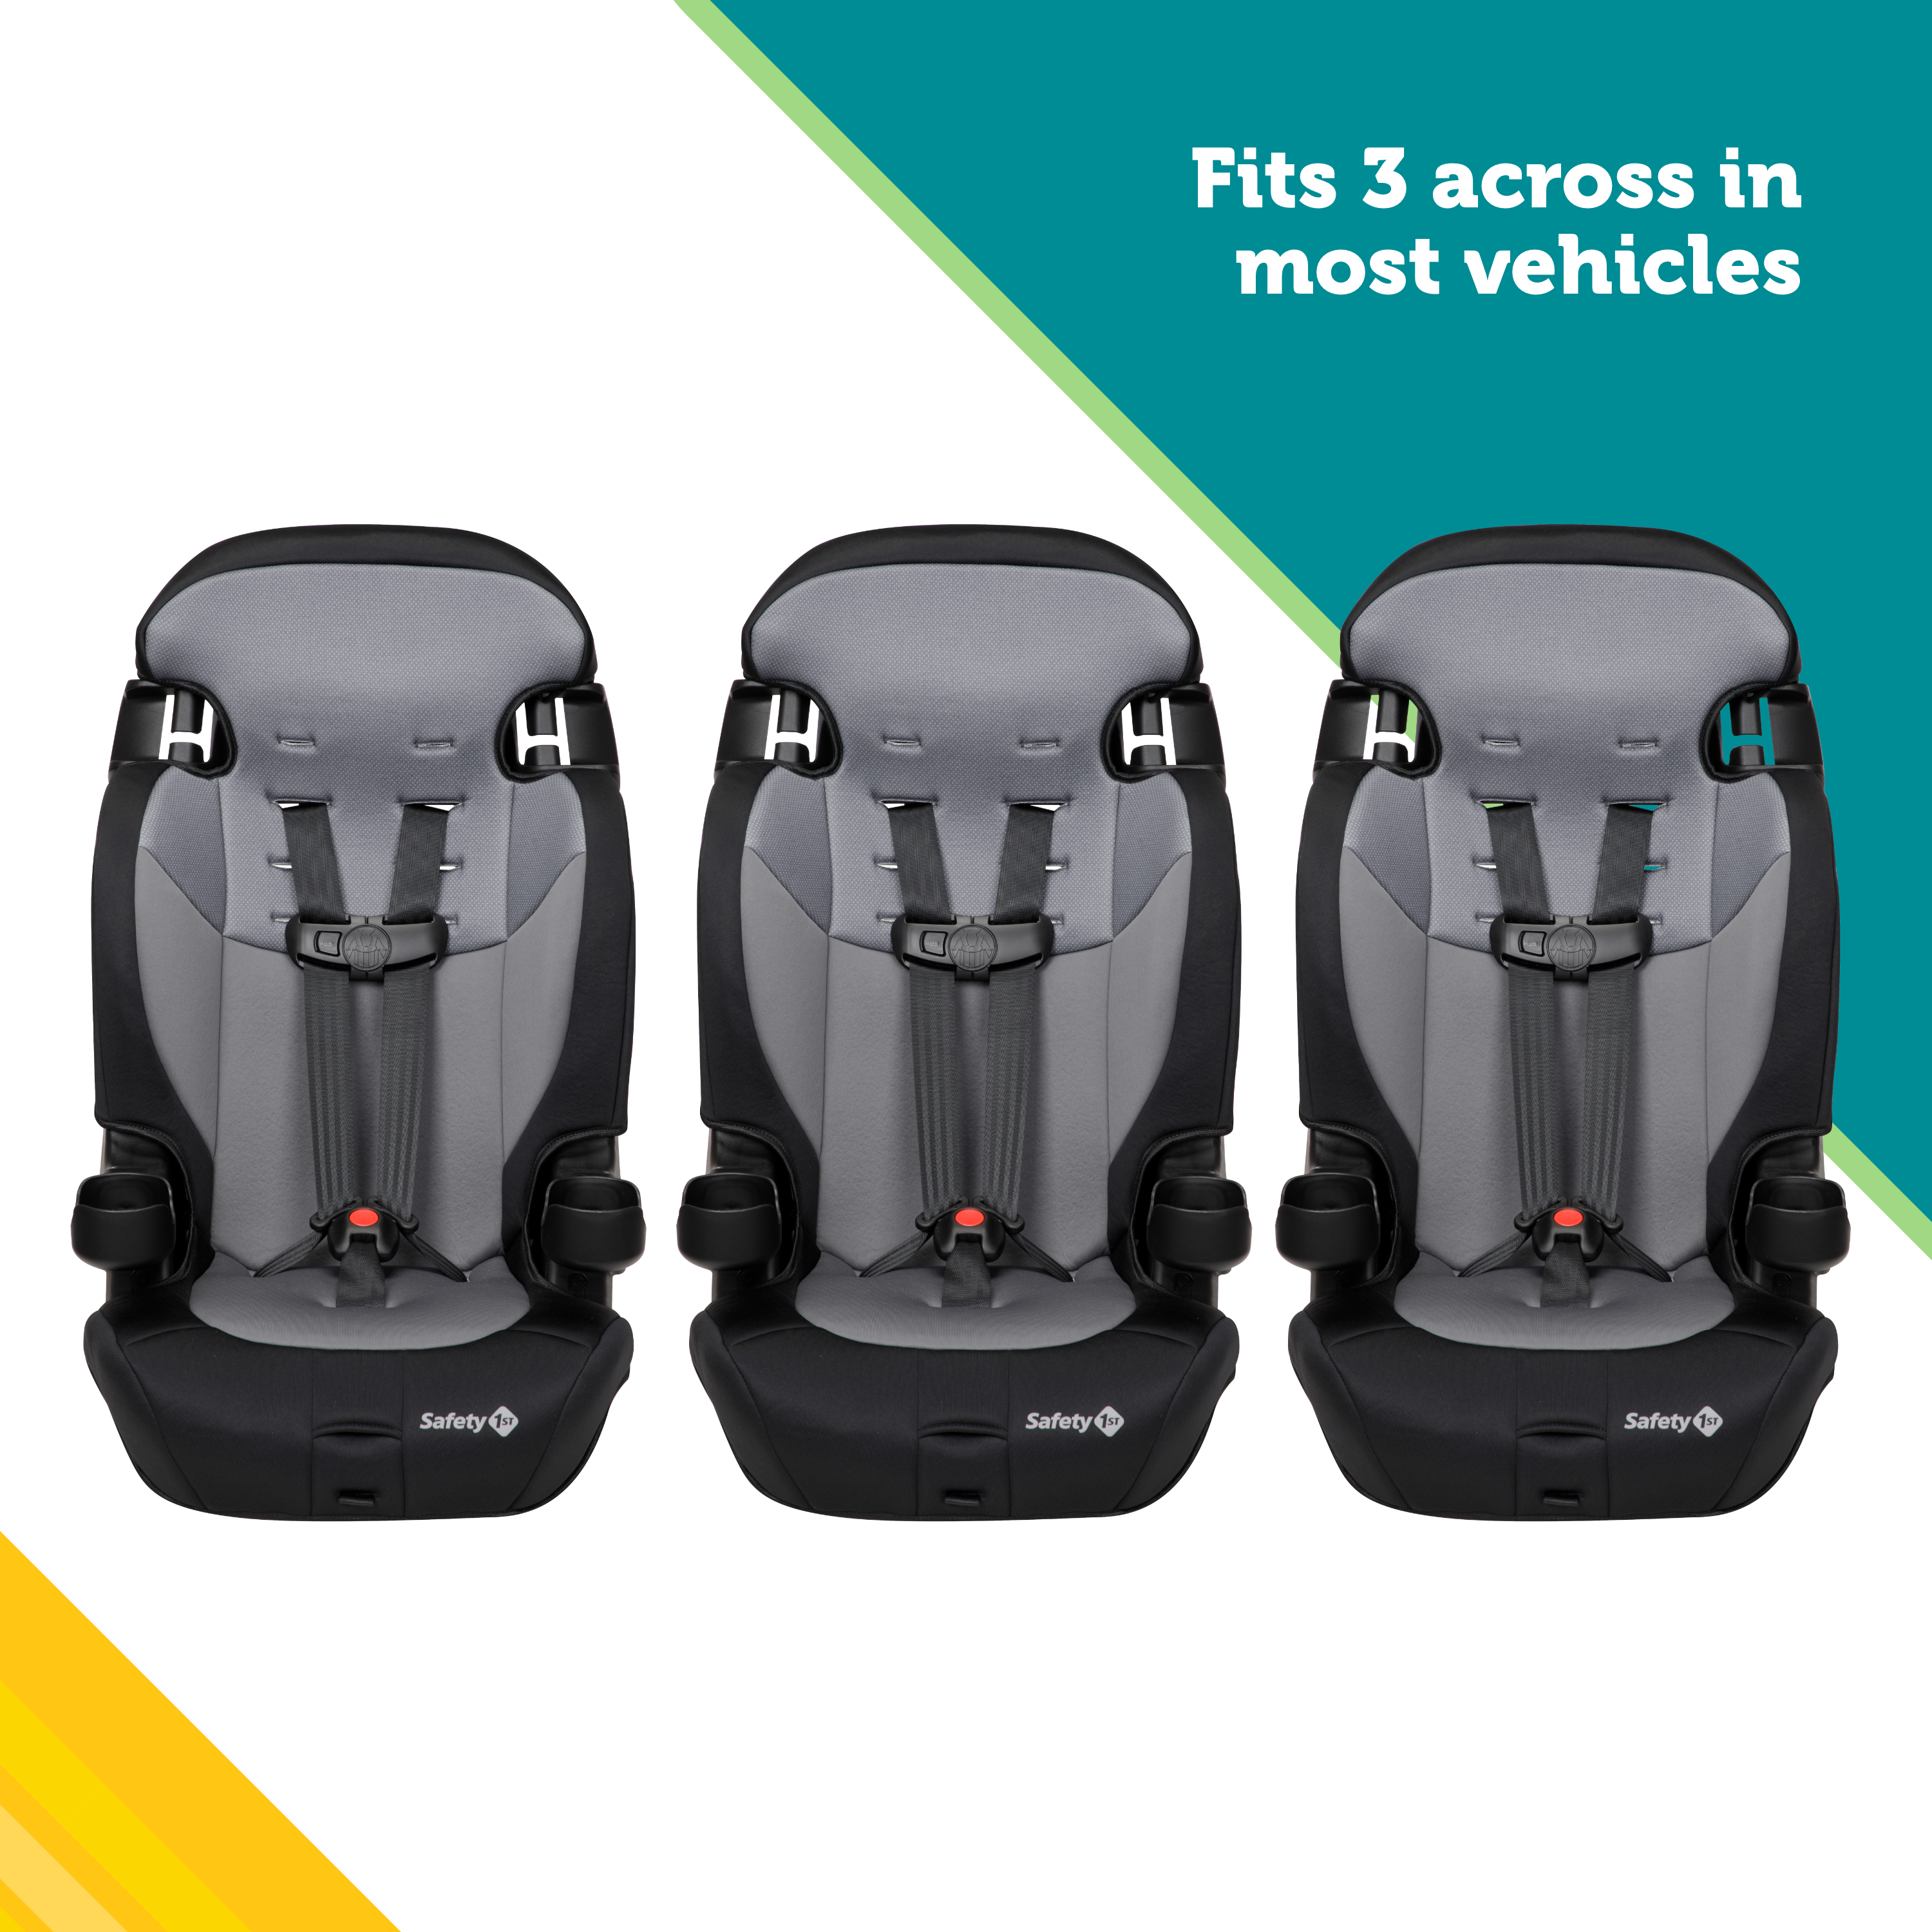 Grand 2-in-1 Booster Car Seat - fits 3 across in most vehicles